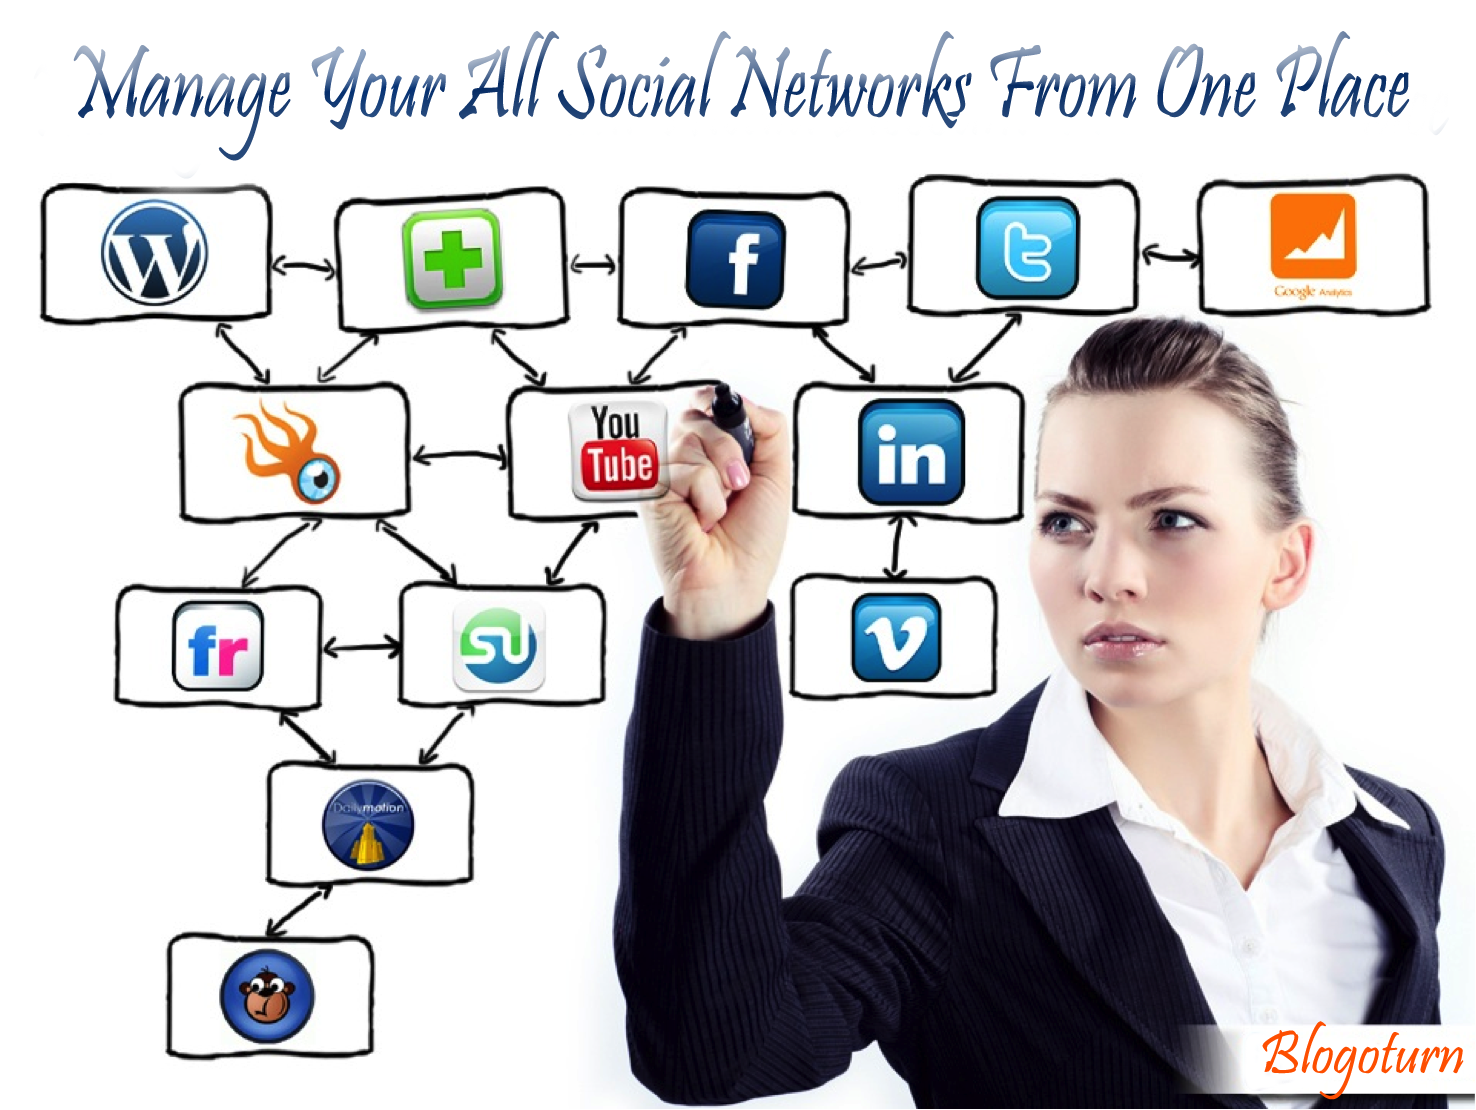 Manage Your All Social Networks From One Place